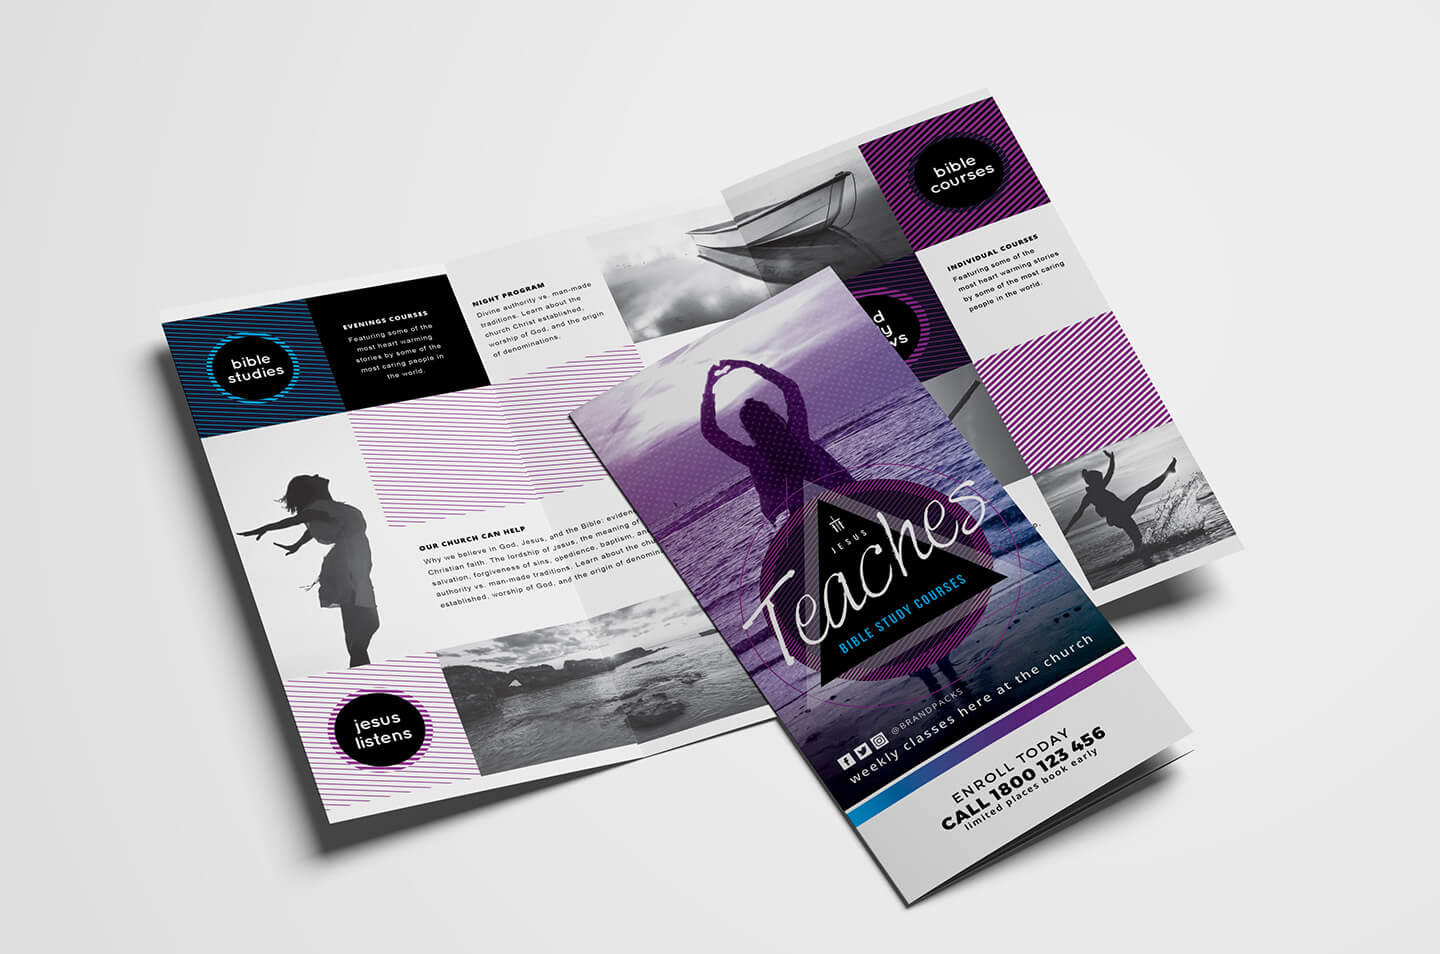 Free Church Templates – Photoshop Psd & Illustrator Ai Intended For Brochure Template Illustrator Free Download